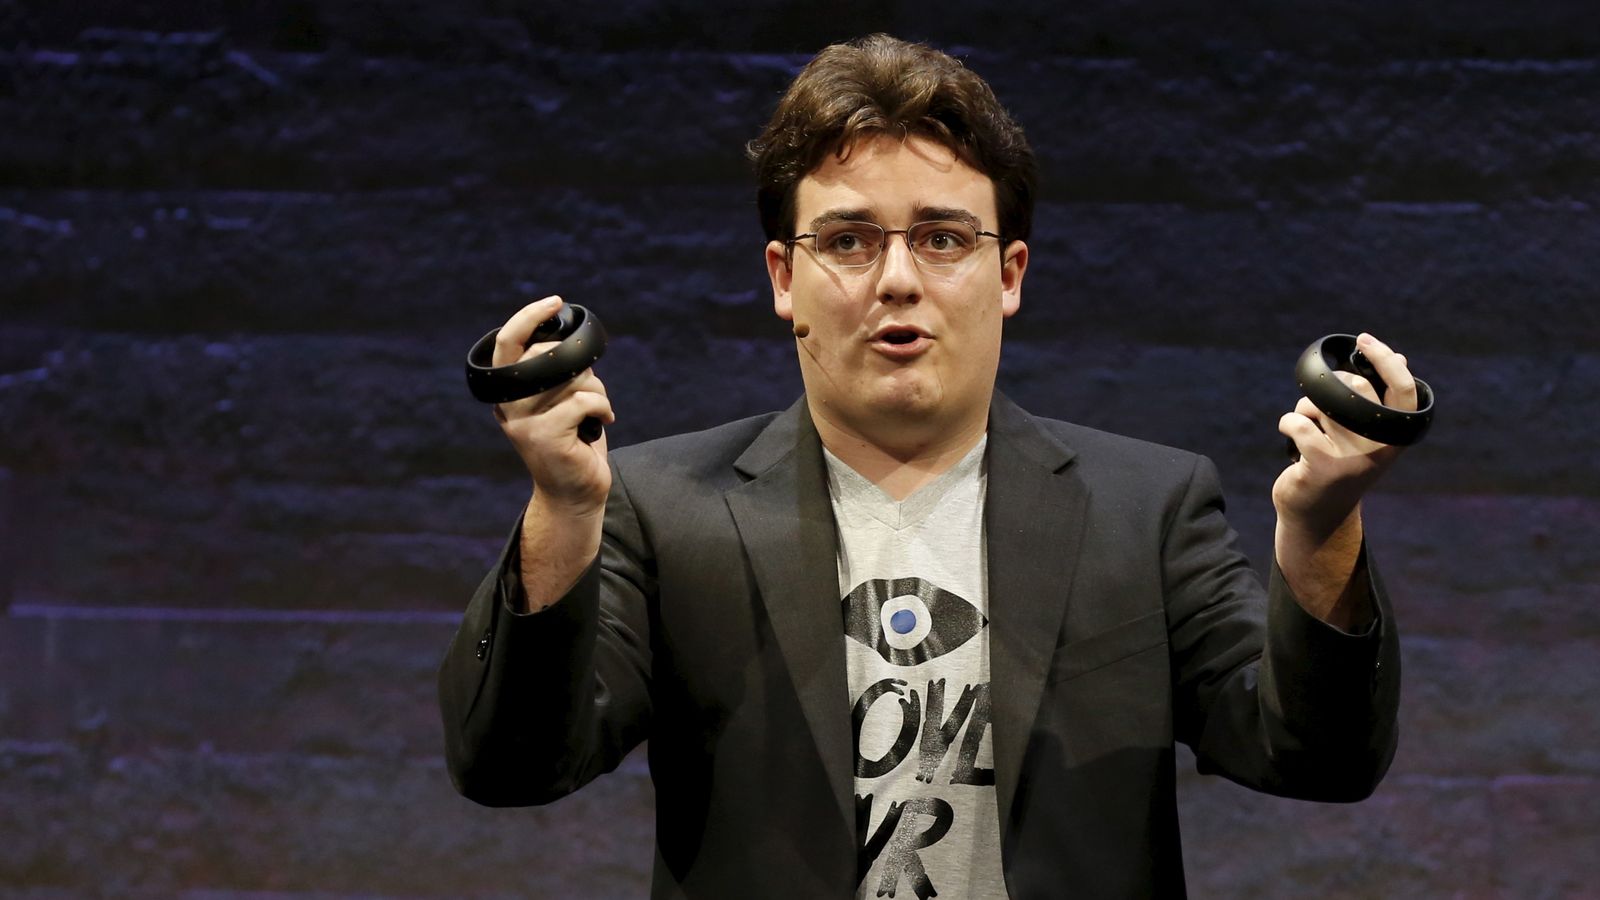 Oculus CEO is latest tech boss hacked in embarrassing account takeover, Oculus